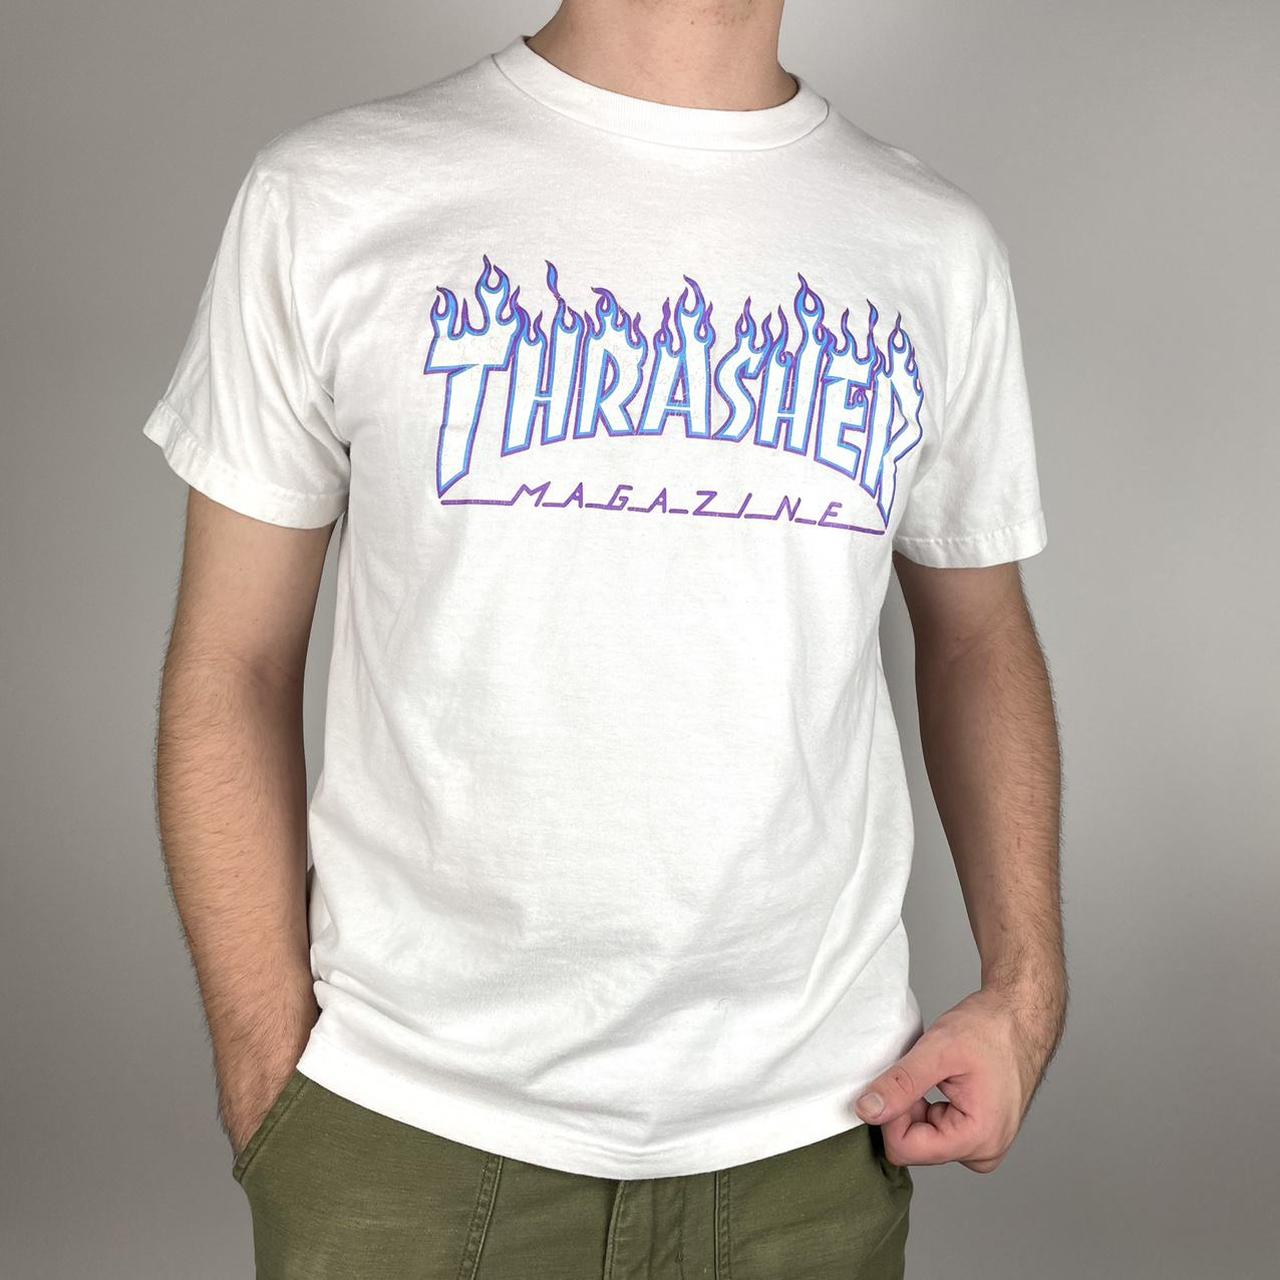 Product Image 1 - Used Thrasher Flame Logo Shirt

In